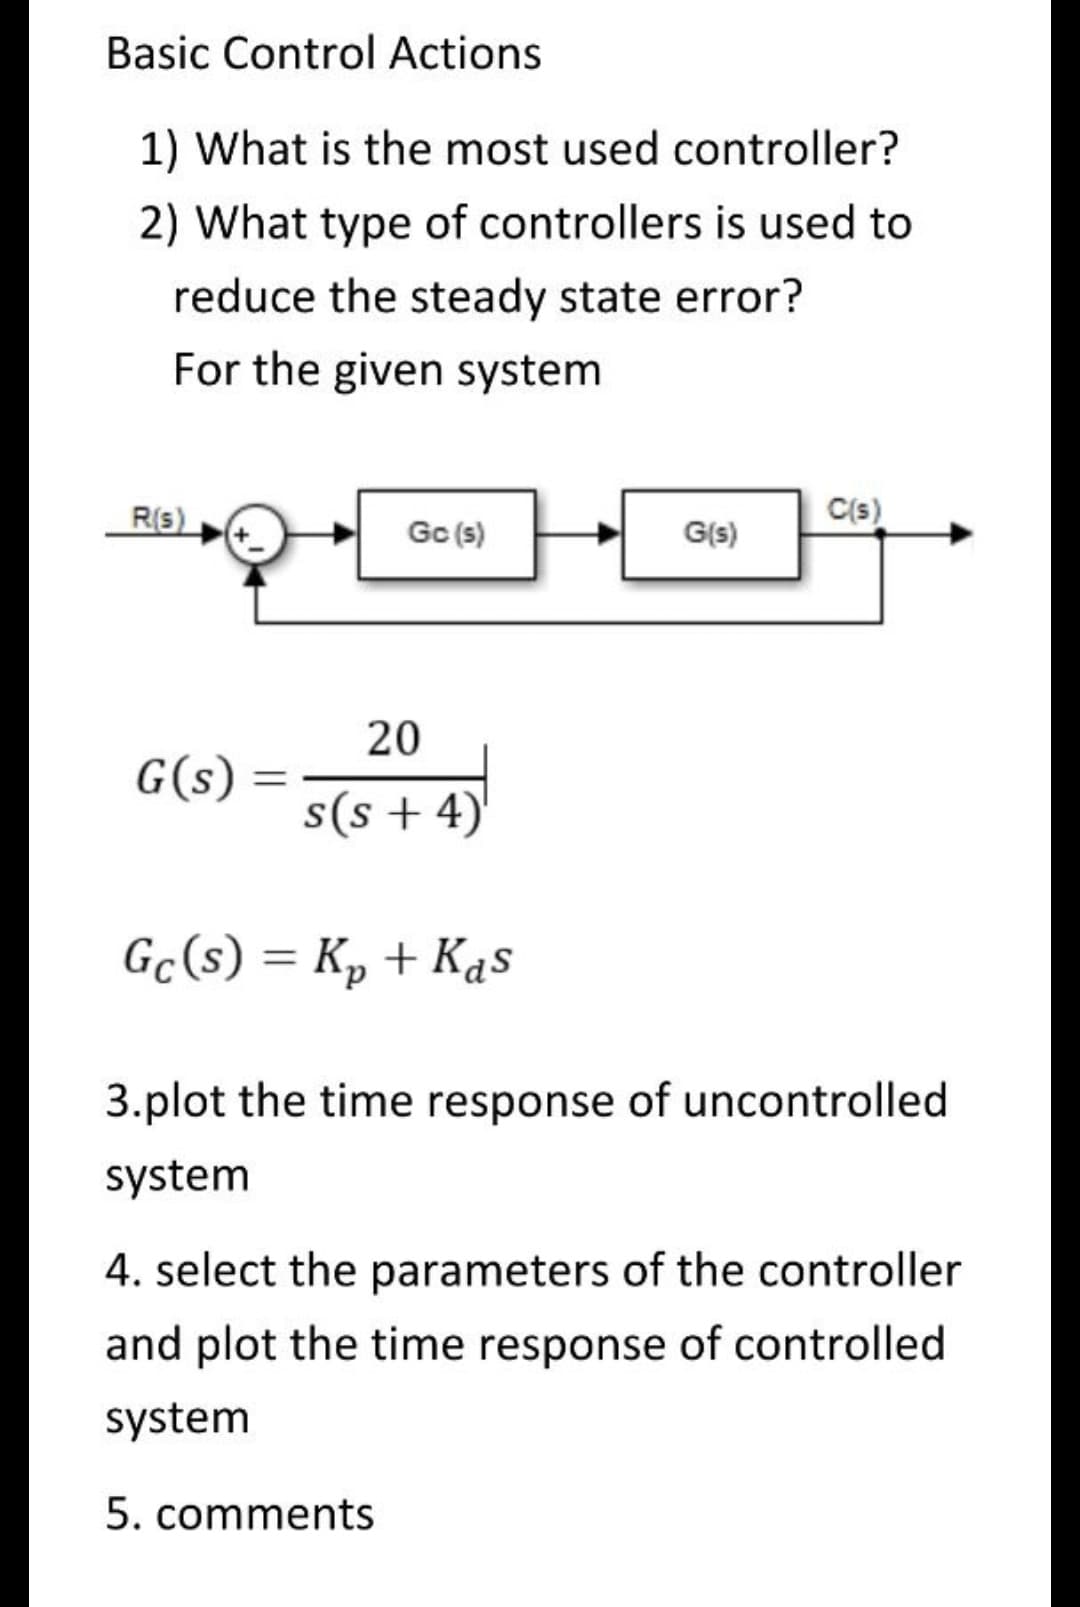 Basic Control Actions
1) What is the most used controller?
2) What type of controllers is used to
reduce the steady state error?
For the given system
R(s)
C(s)
Gc (s)
G(s)
20
G(s)
s(s+4)
Gc(s) = K₂ + Kas
3.plot the time response of uncontrolled
system
4. select the parameters of the controller
and plot the time response of controlled
system
5. comments
=